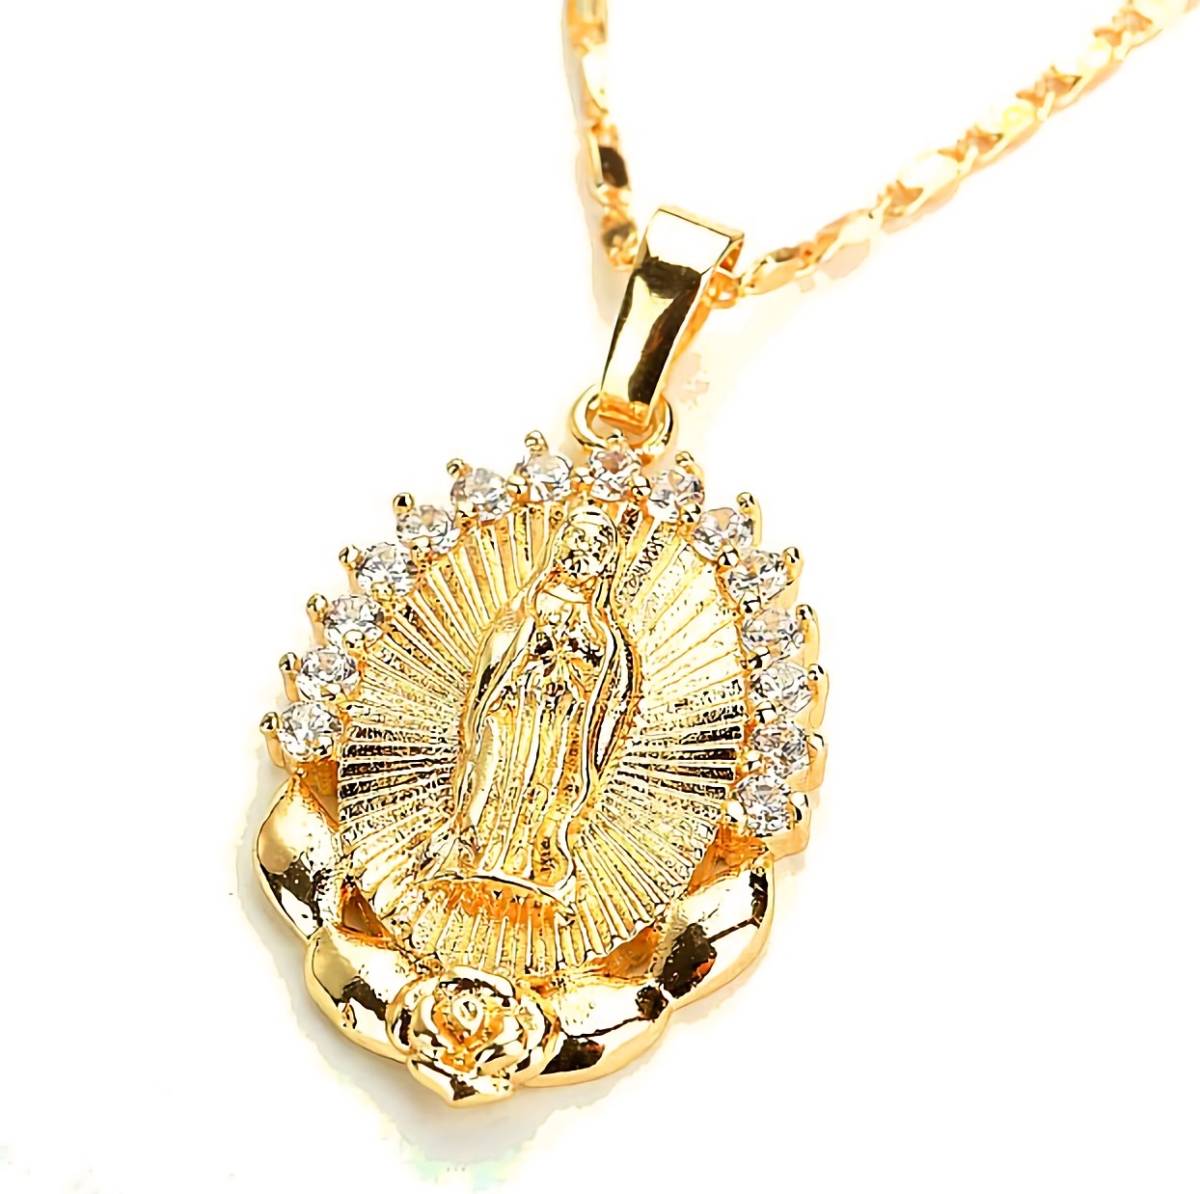  new goods 1 jpy ~* free shipping * yellow gold coin Mali a.. image diamond K18GF Gold necklace birthday present faith travel consecutive holidays summer festival flower fire gift domestic sending 